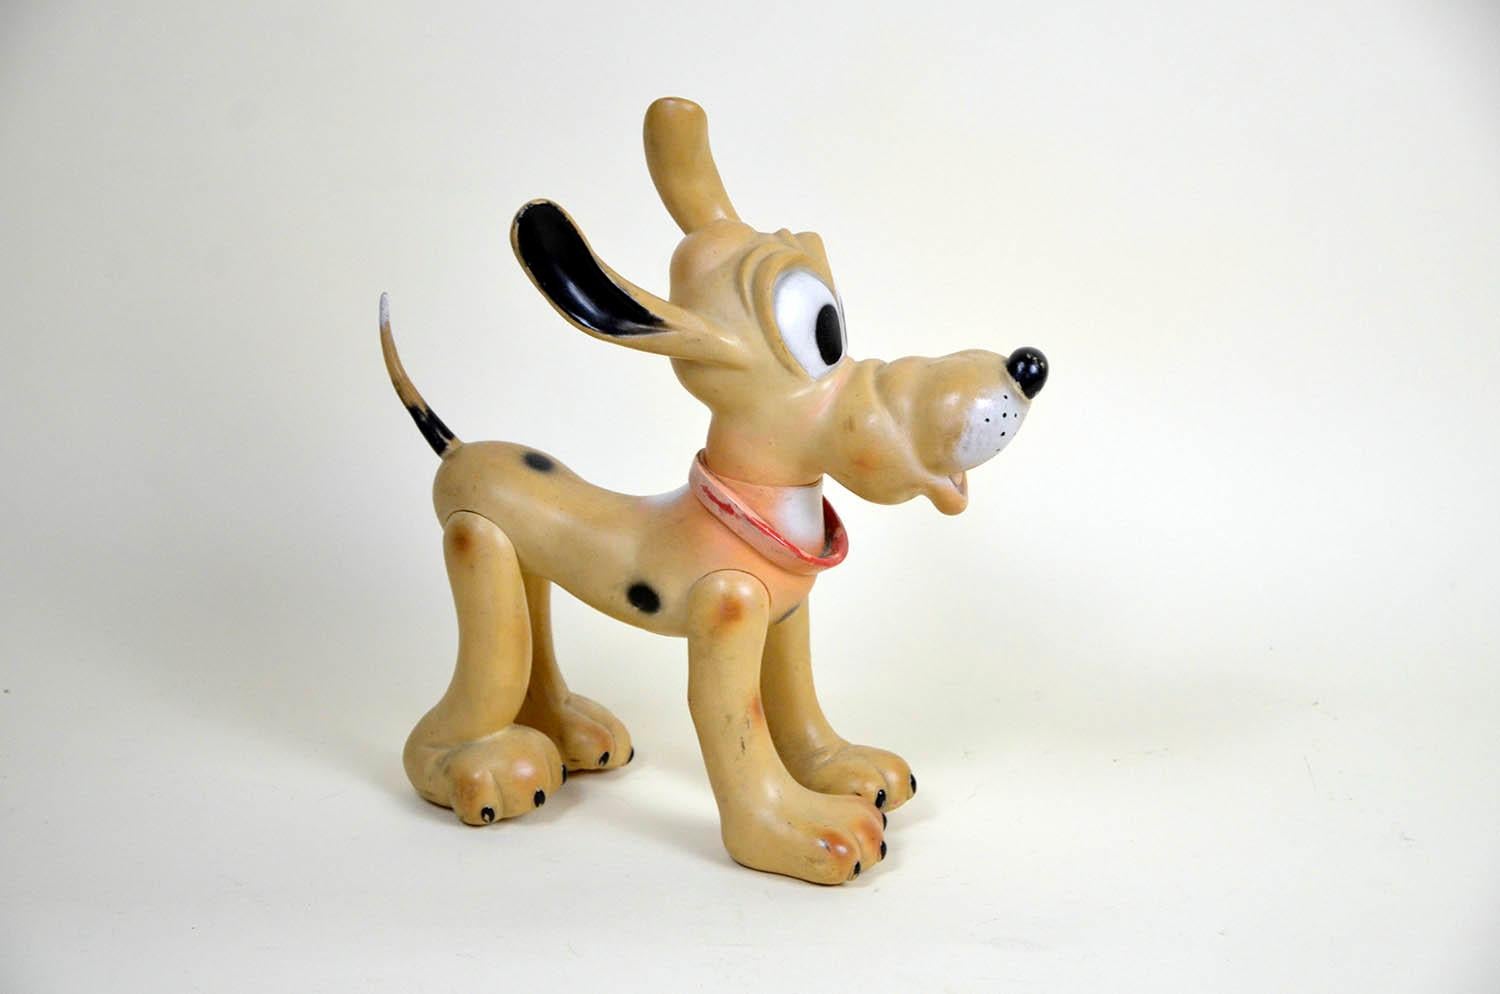 rubber toys made in italy